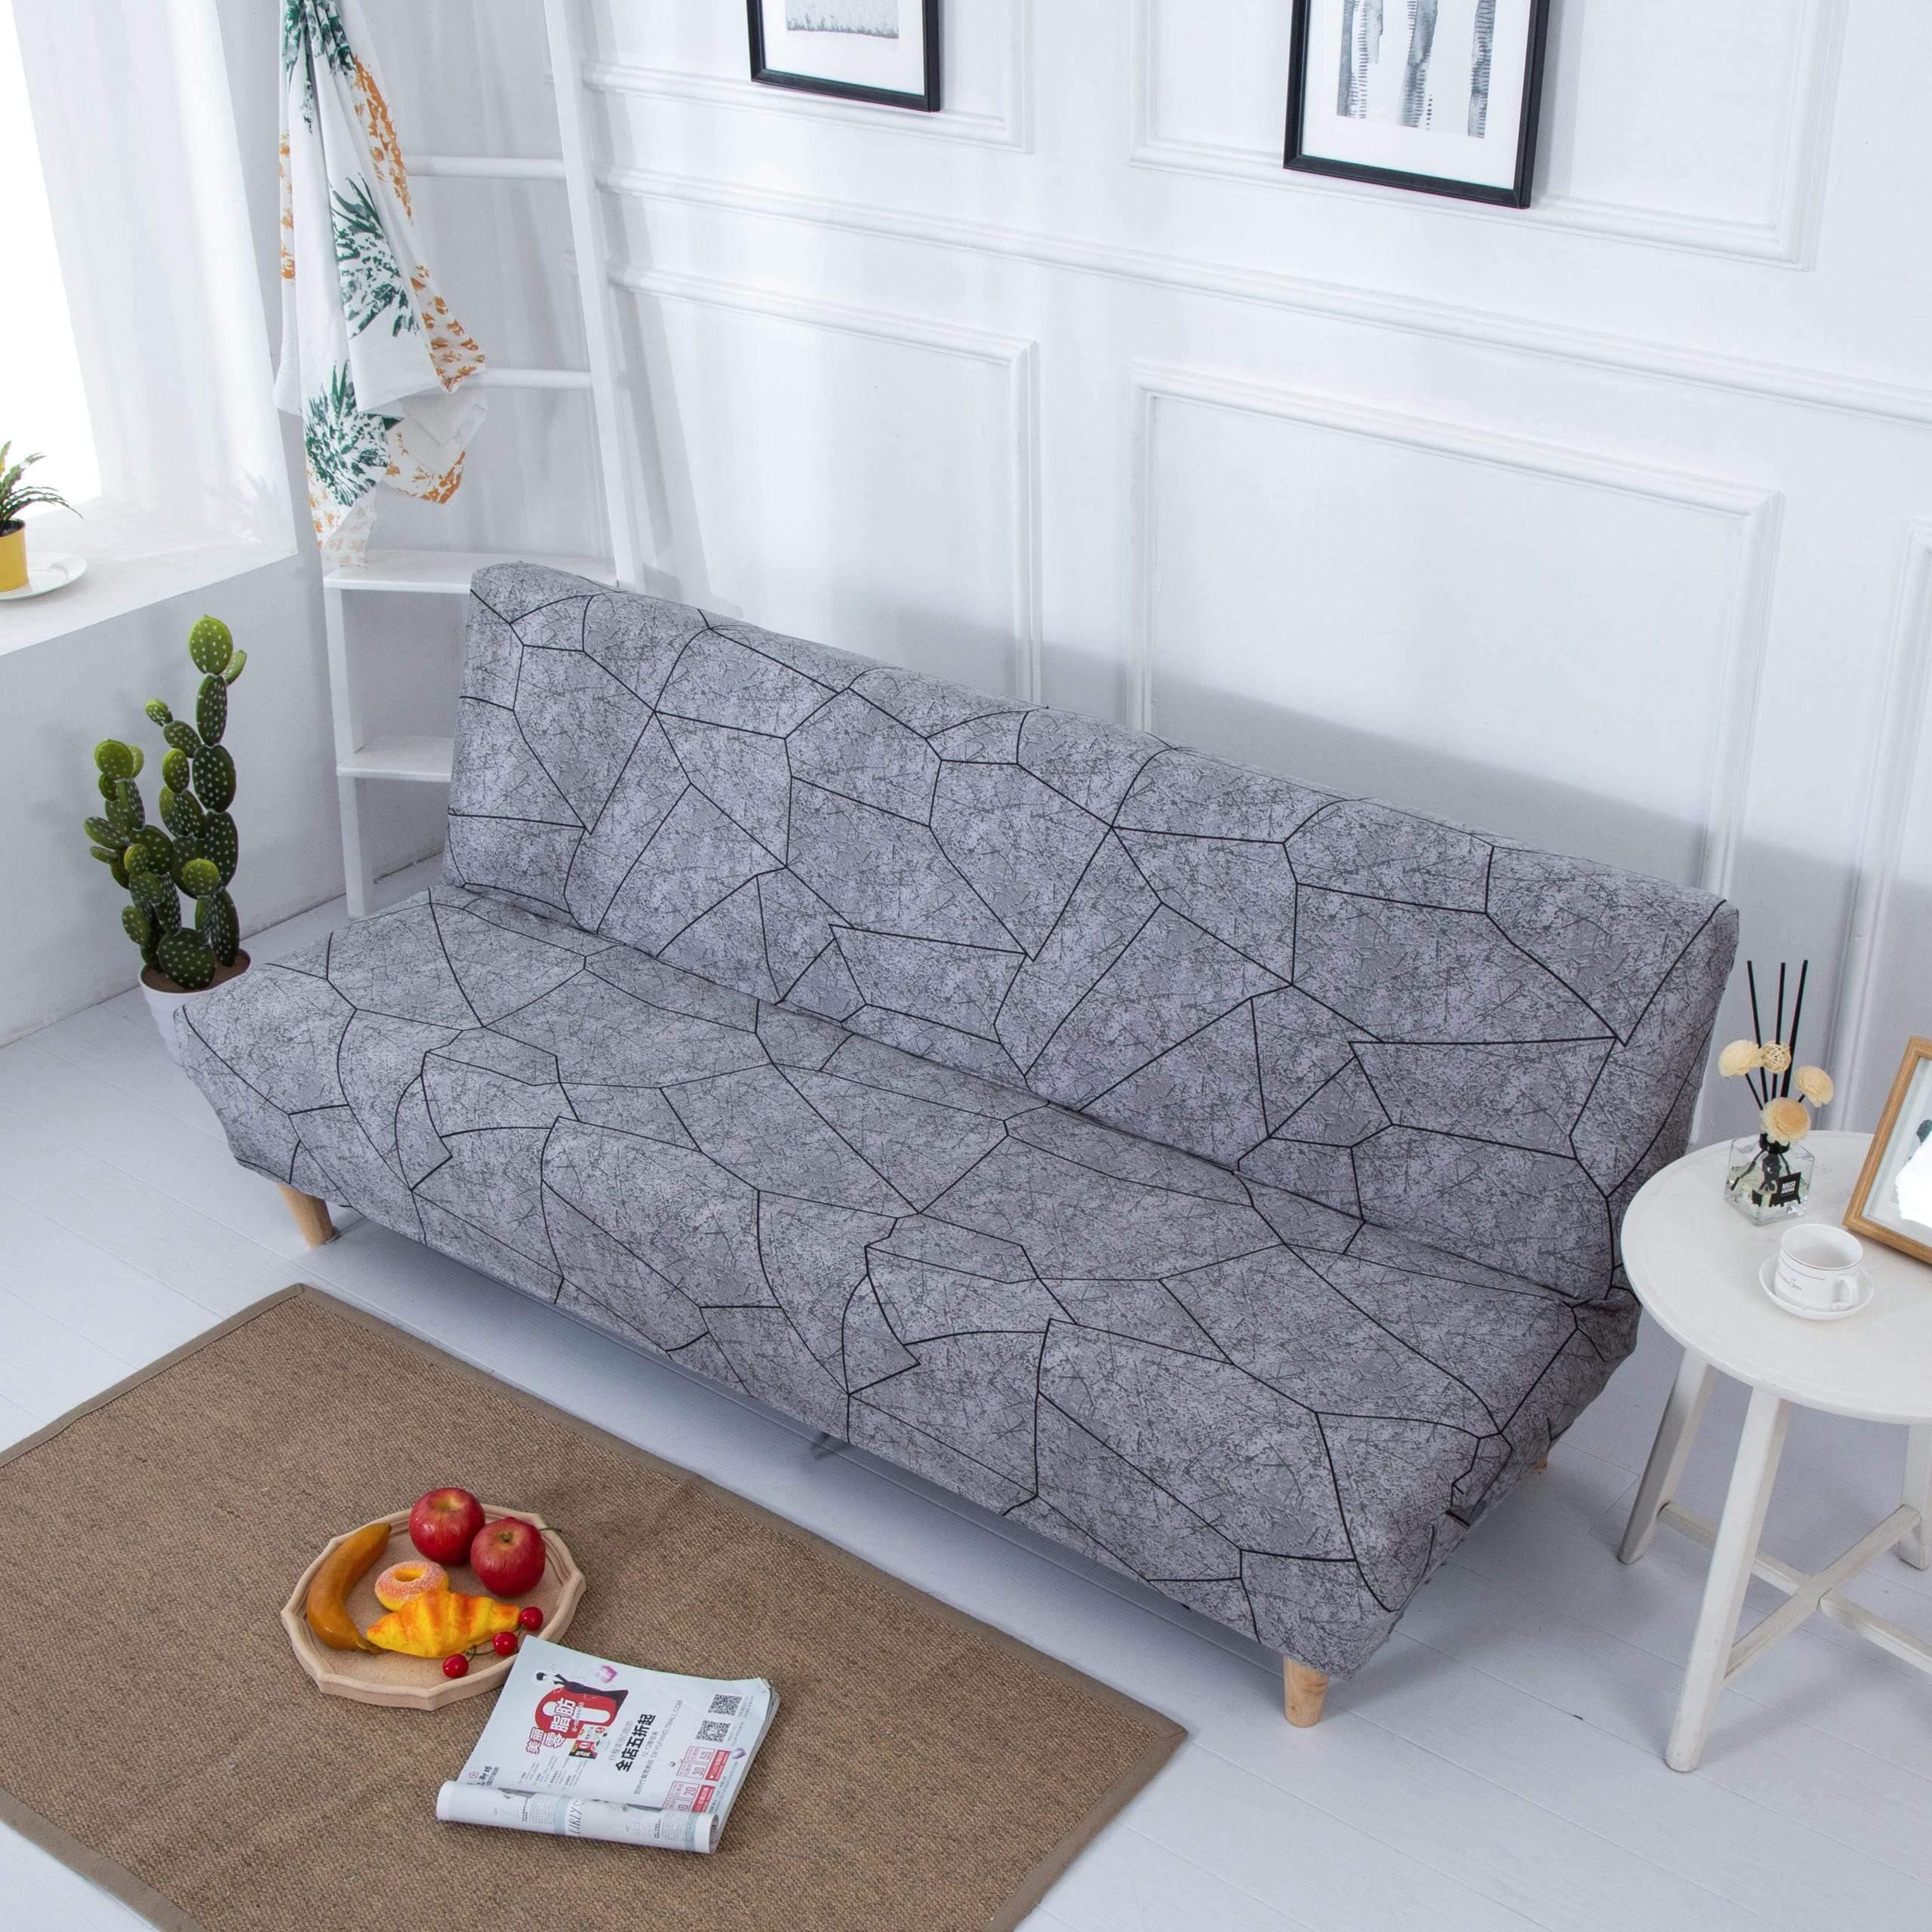 Sofa Bed Cover - Taub - Adaptable & Expandable - The Sofa Cover Crafter